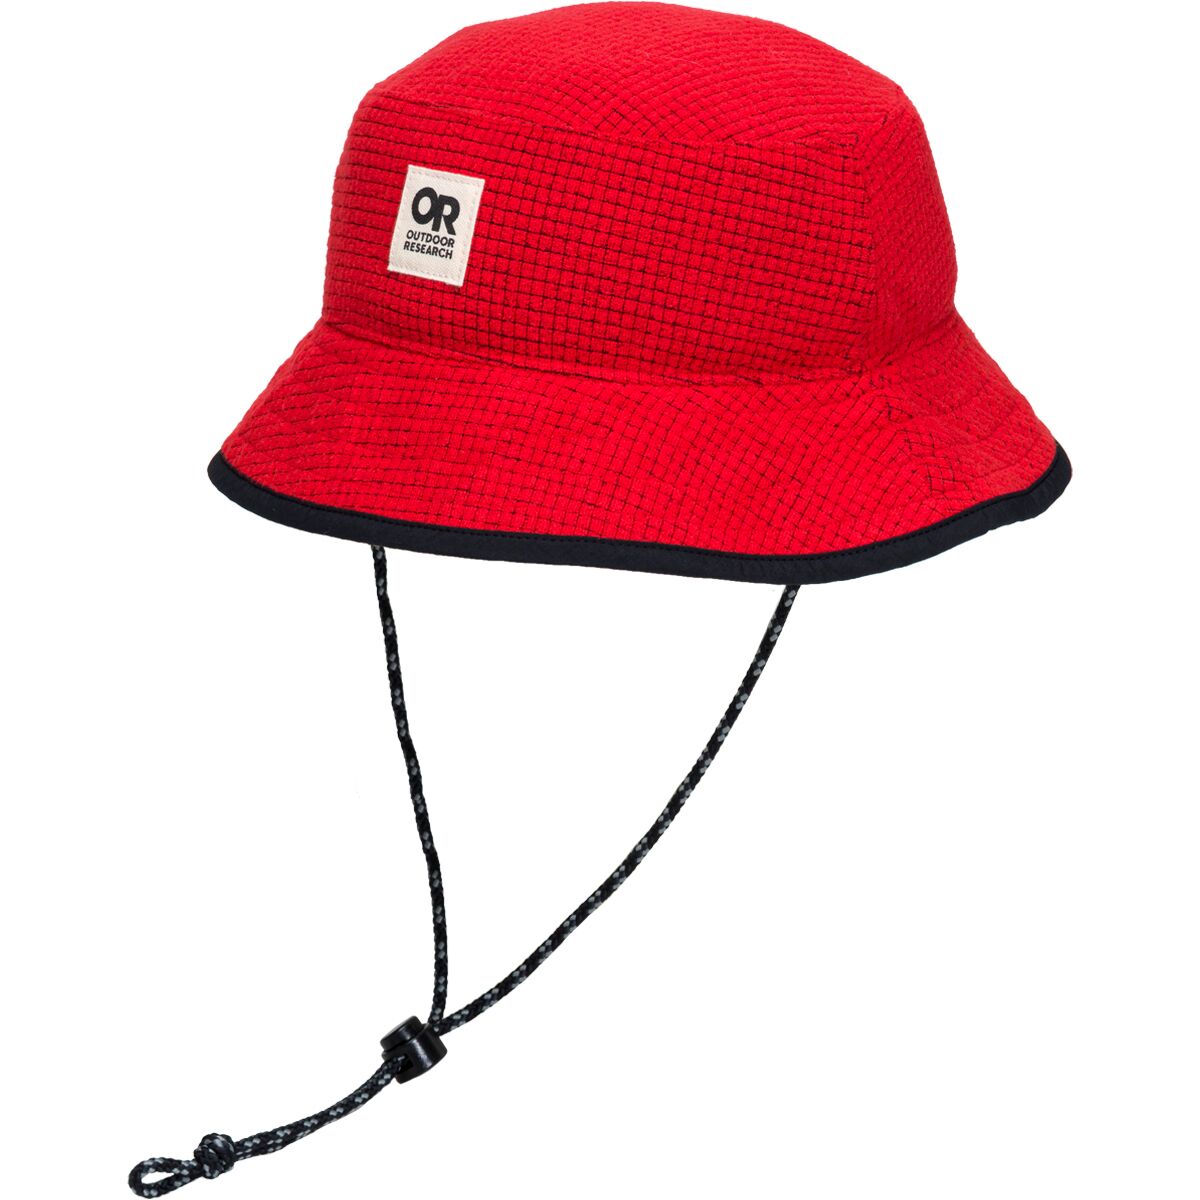 Outdoor Research Trail Mix Bucket Hat Cranberry, L/XL